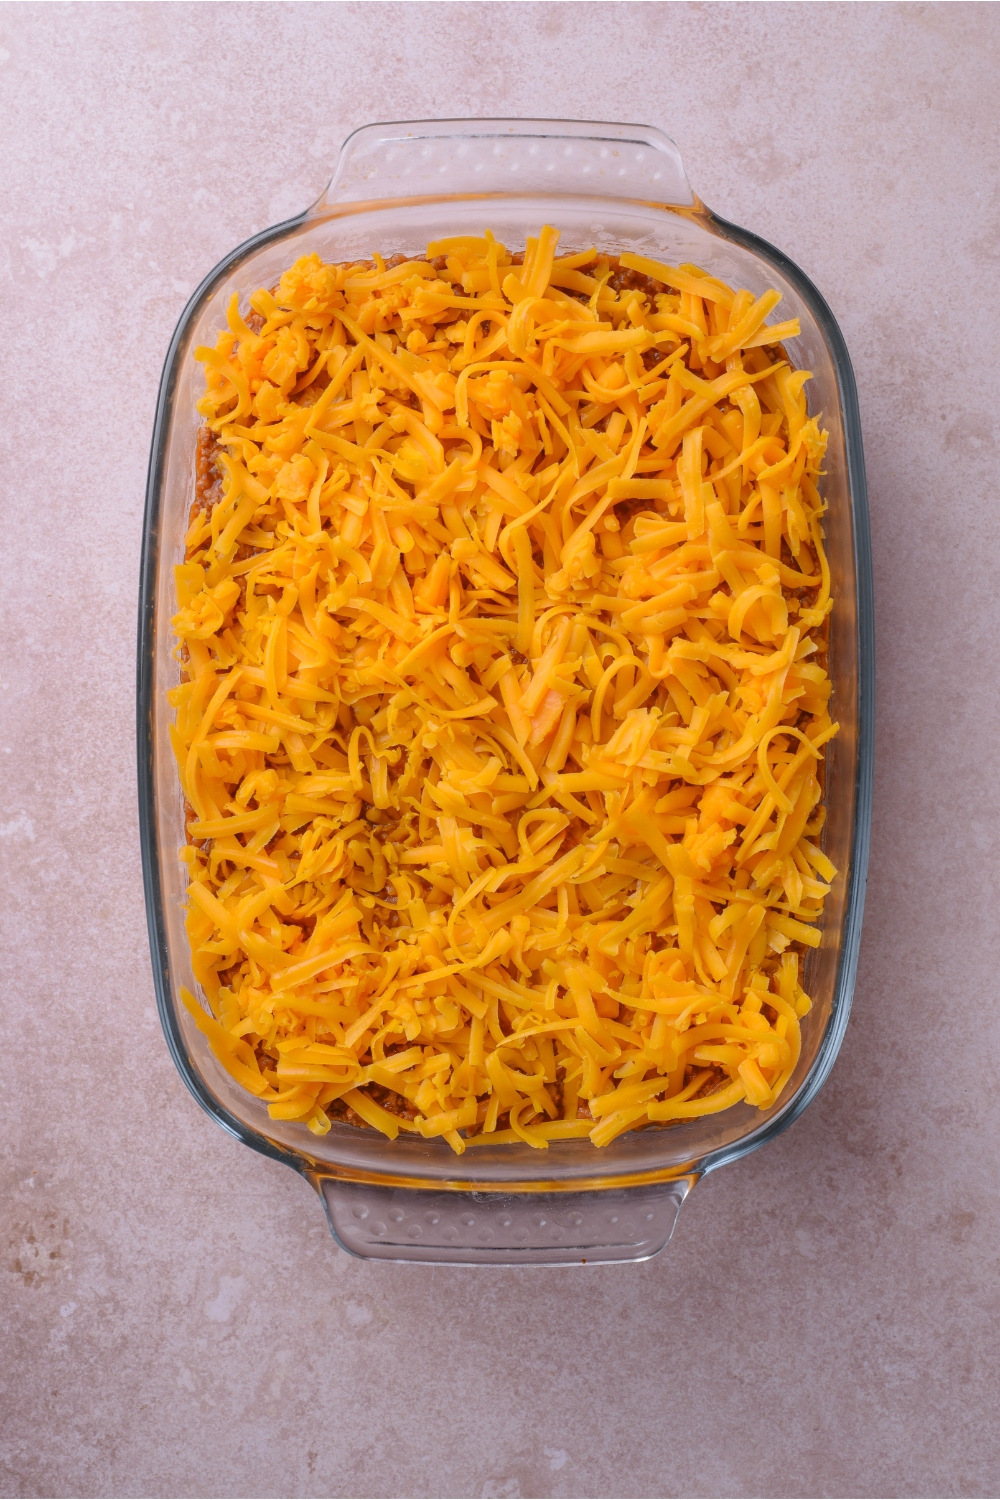 A clear baking dish filled with an unbaked casserole covered in shredded cheese.